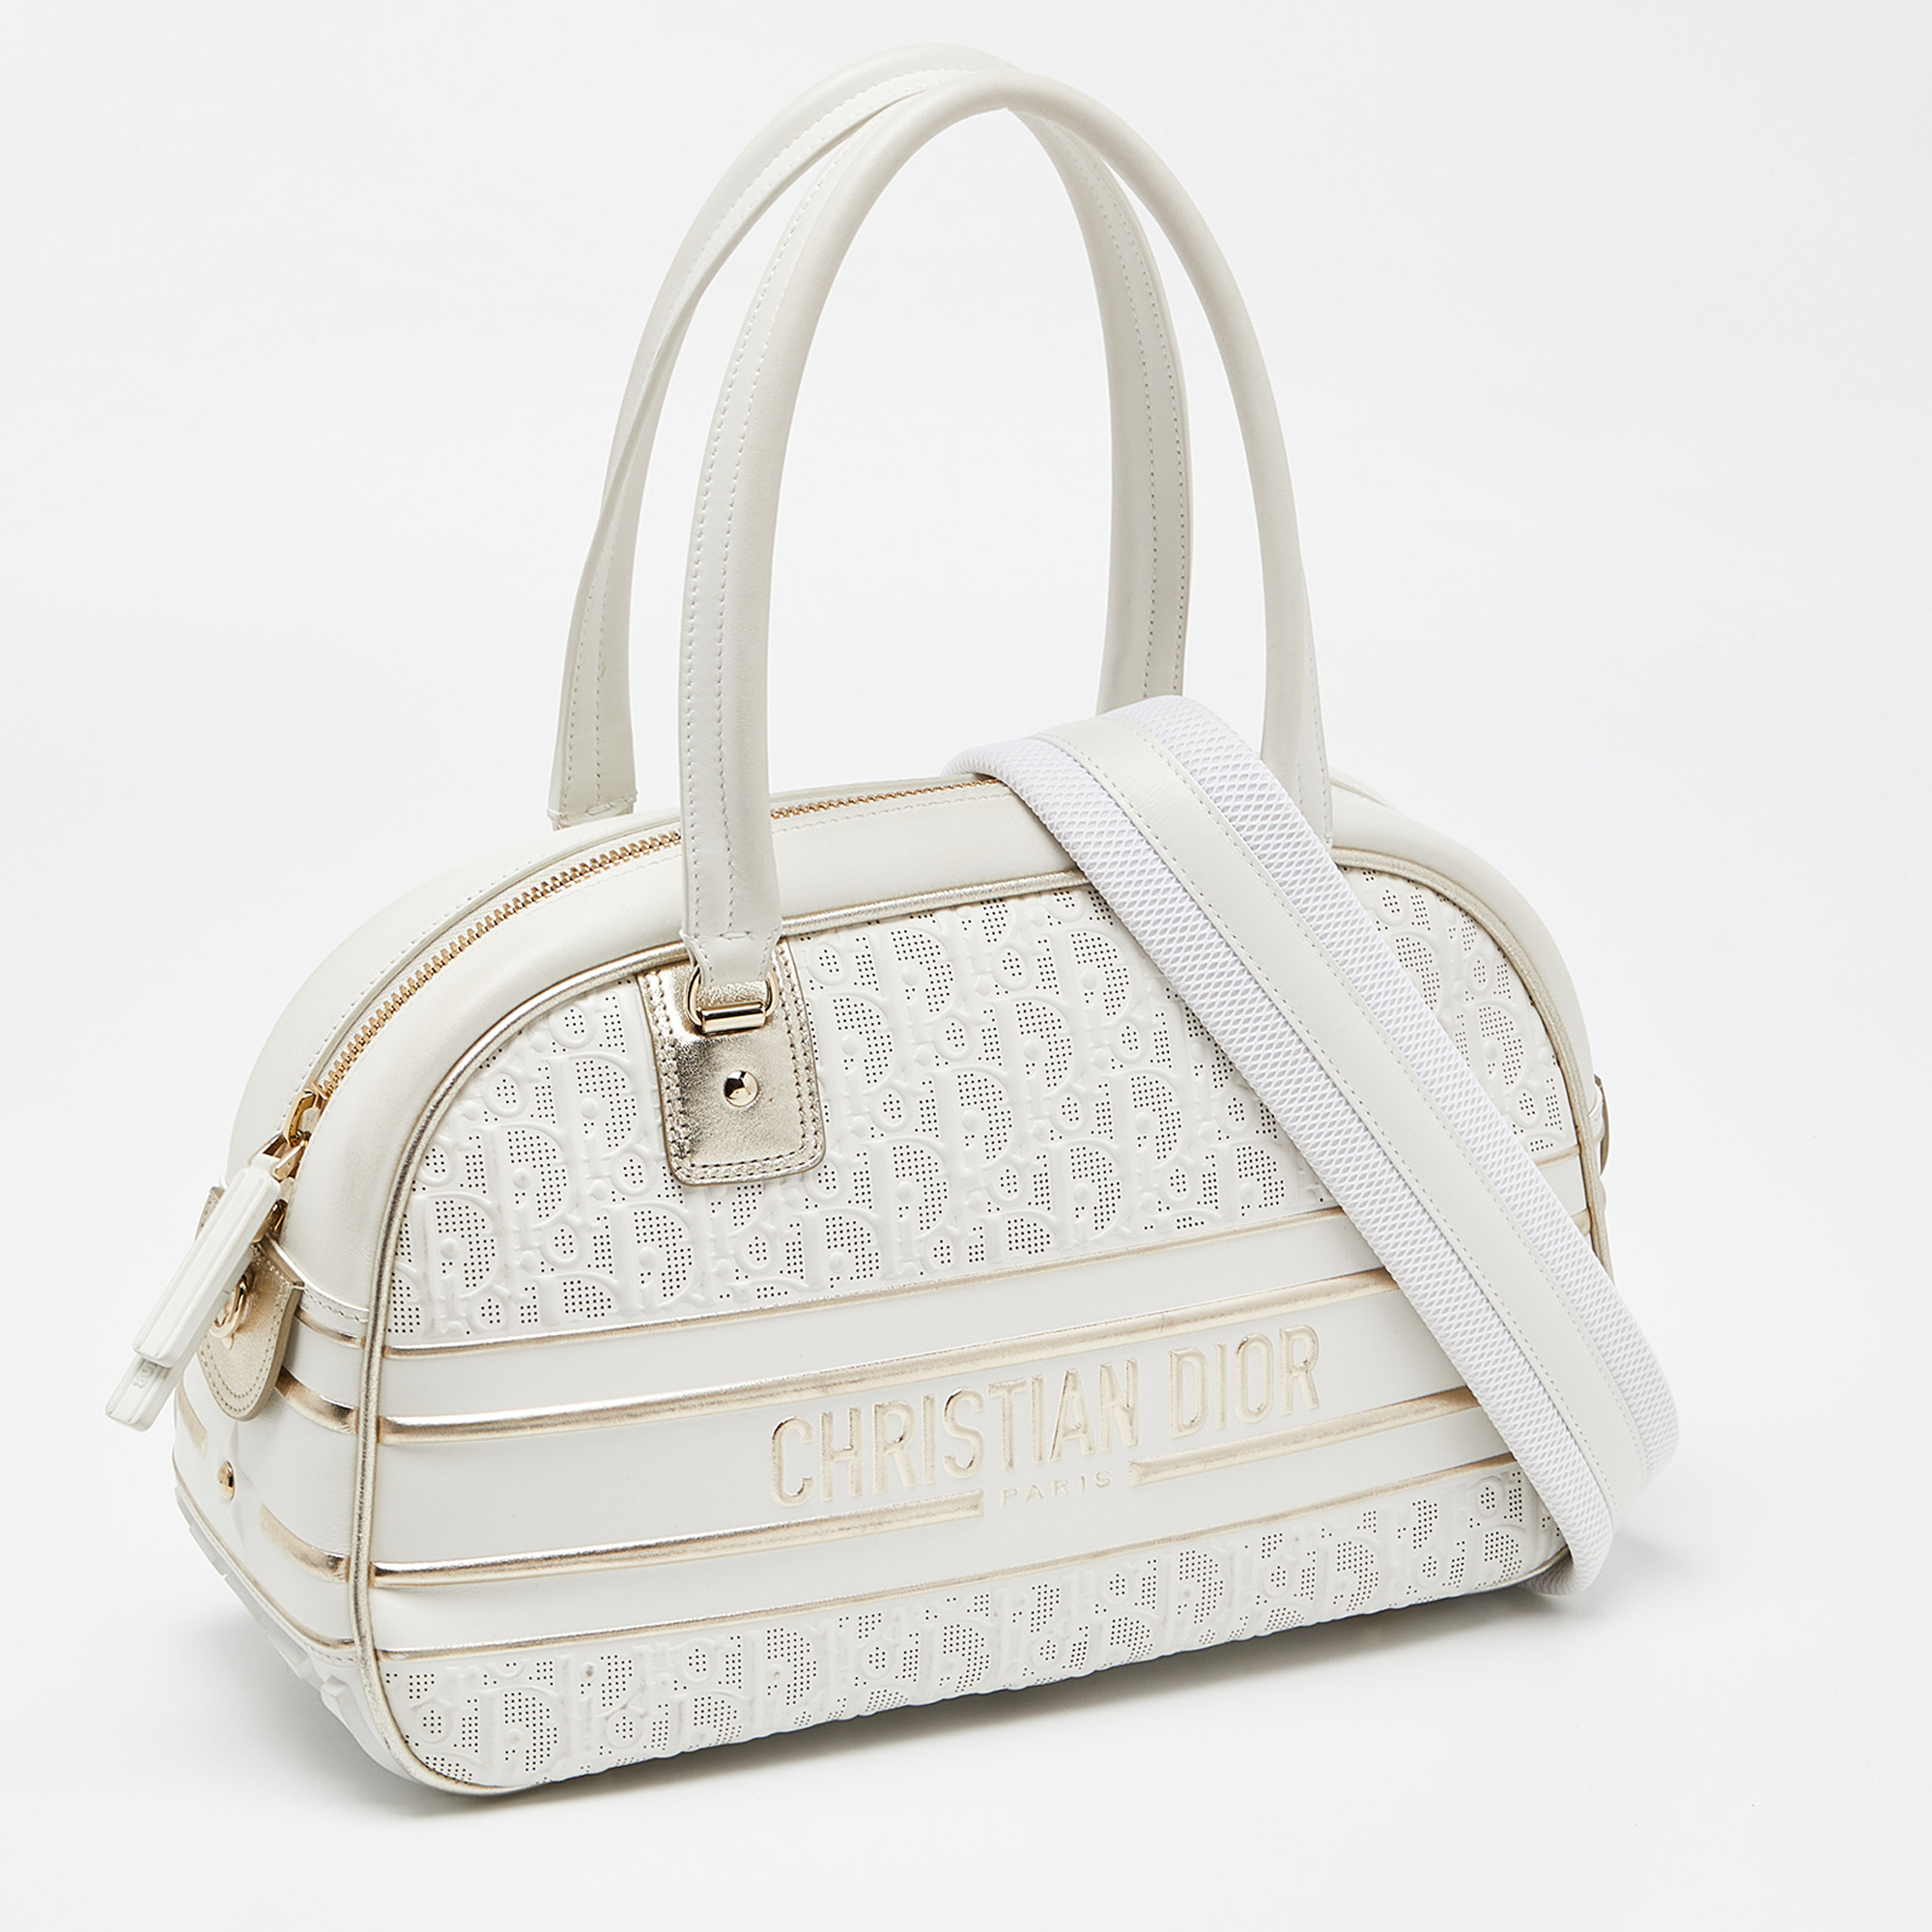 Dior White/Gold Perforated Oblique Leather And Rubber Medium Vibe Bowler Bag